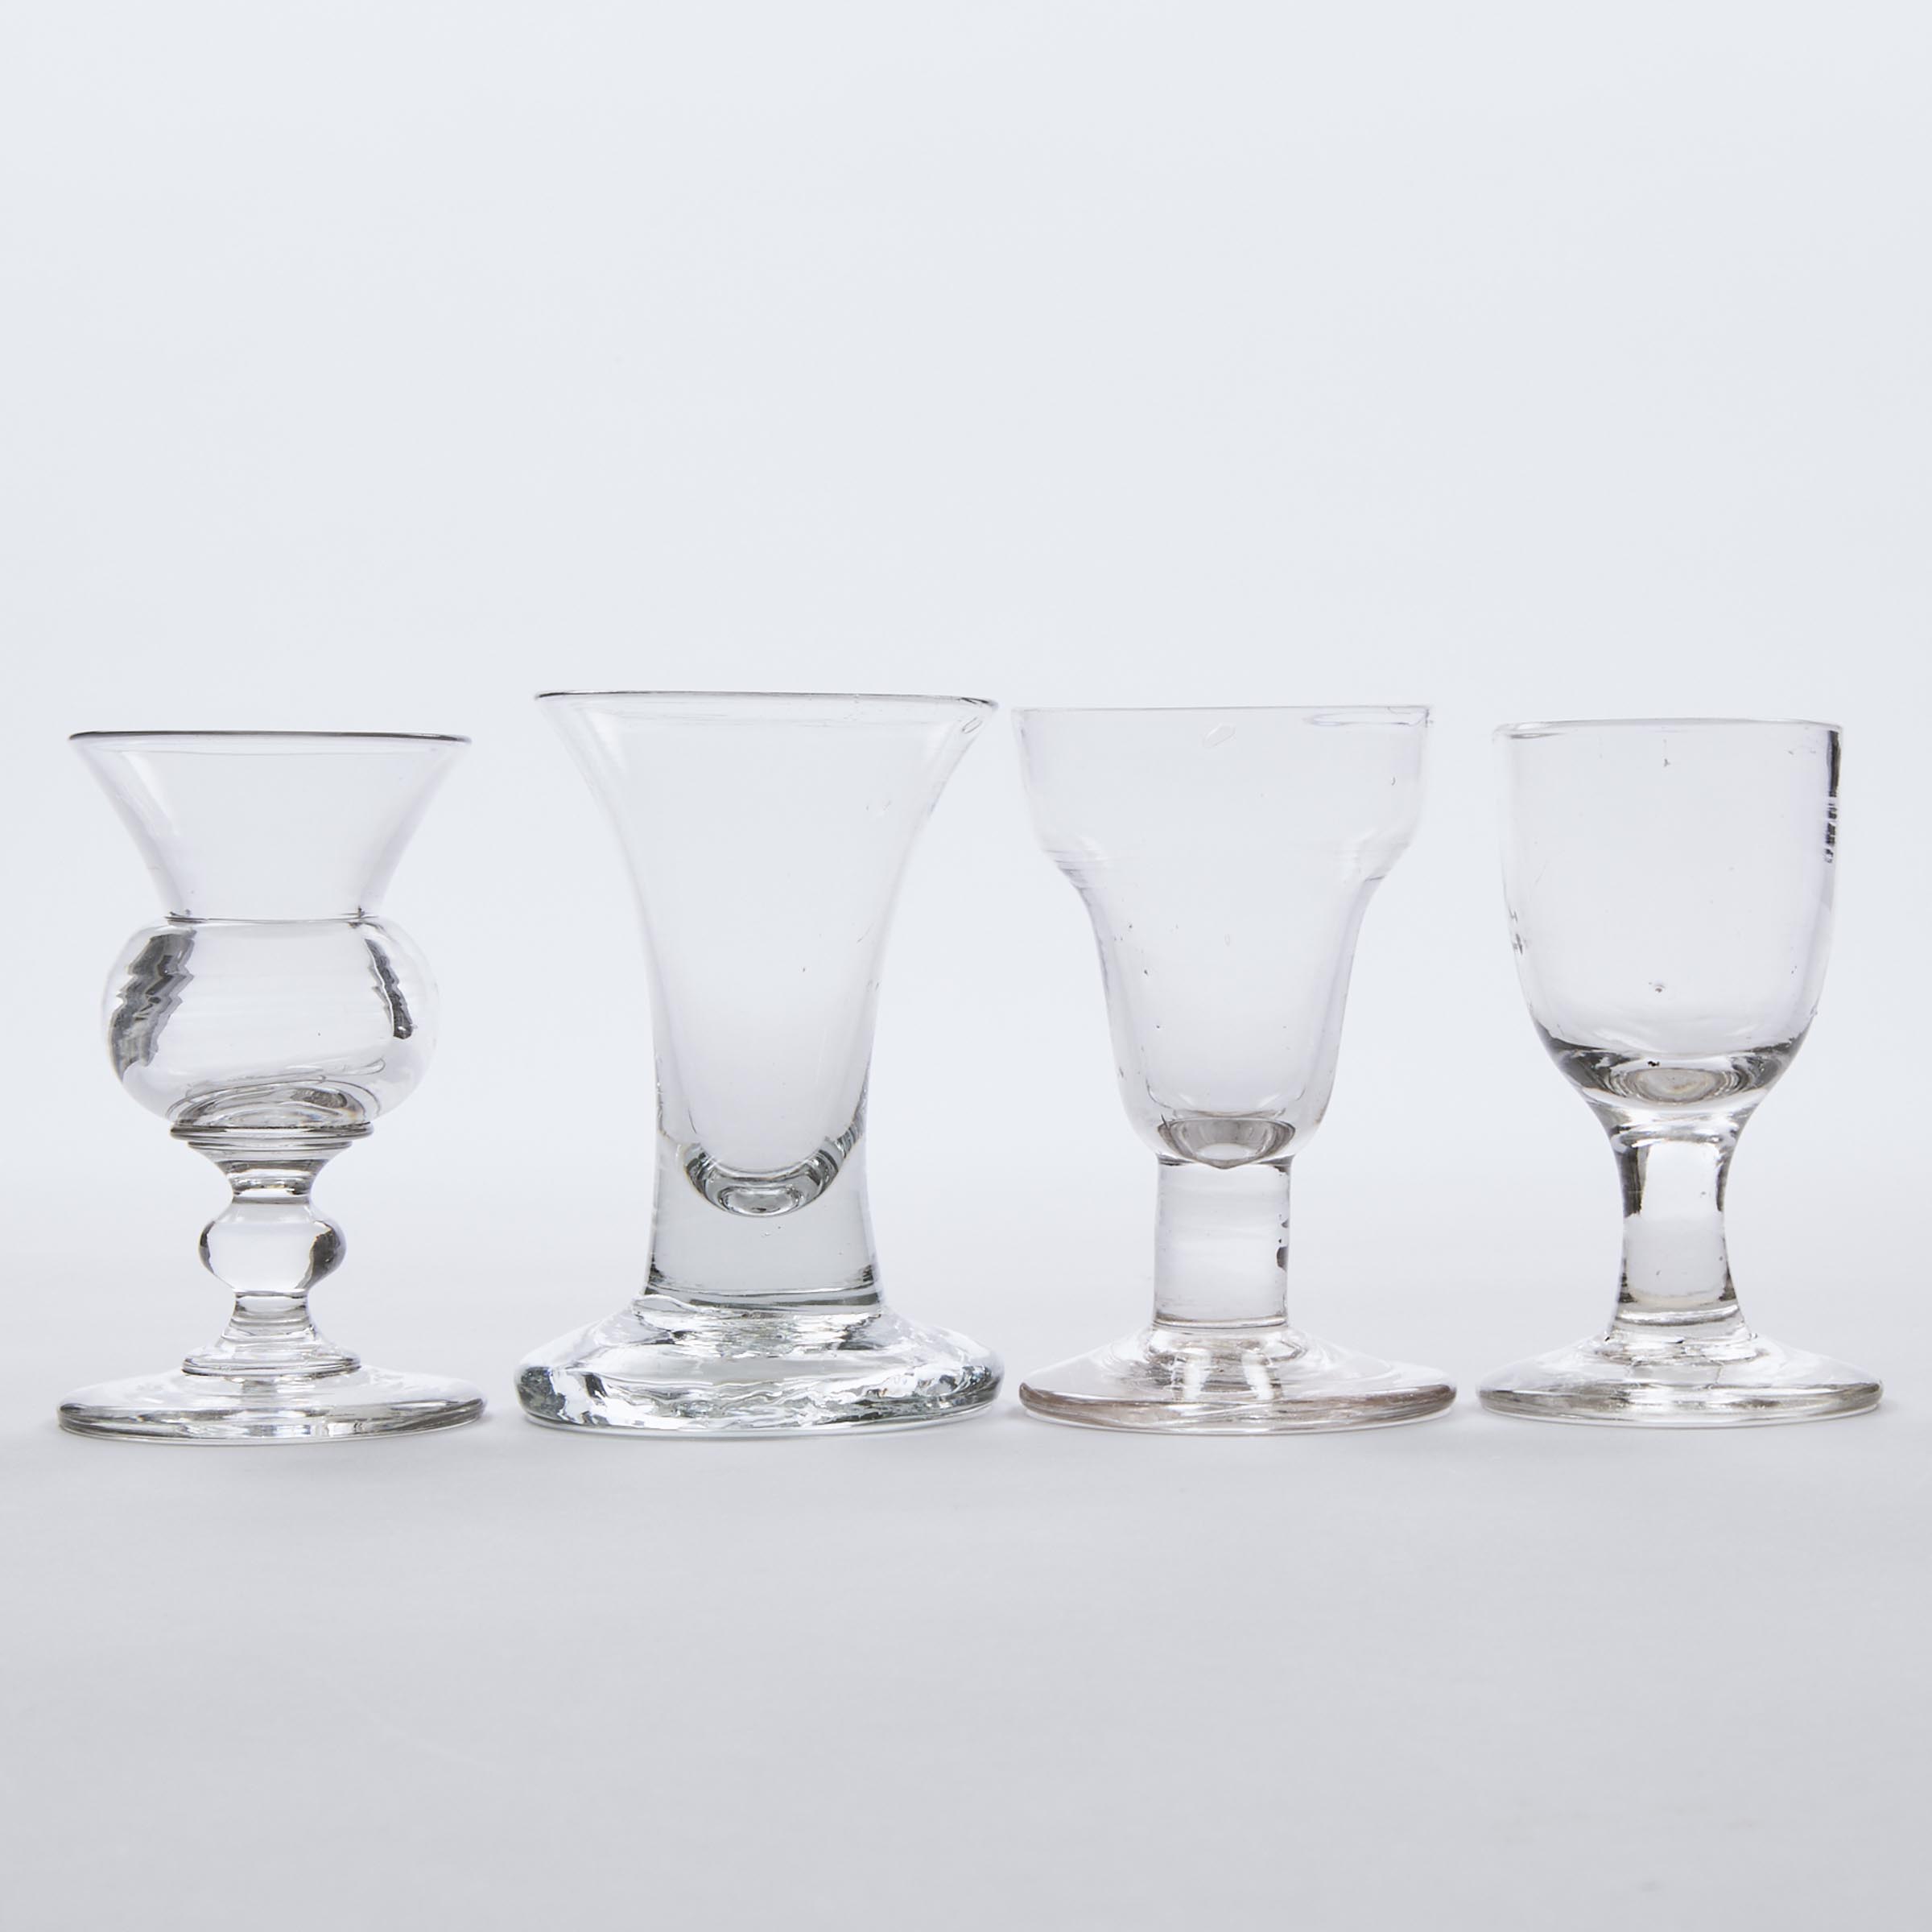 Four English Dram or Firing Glasses, late 18th/early 19th century